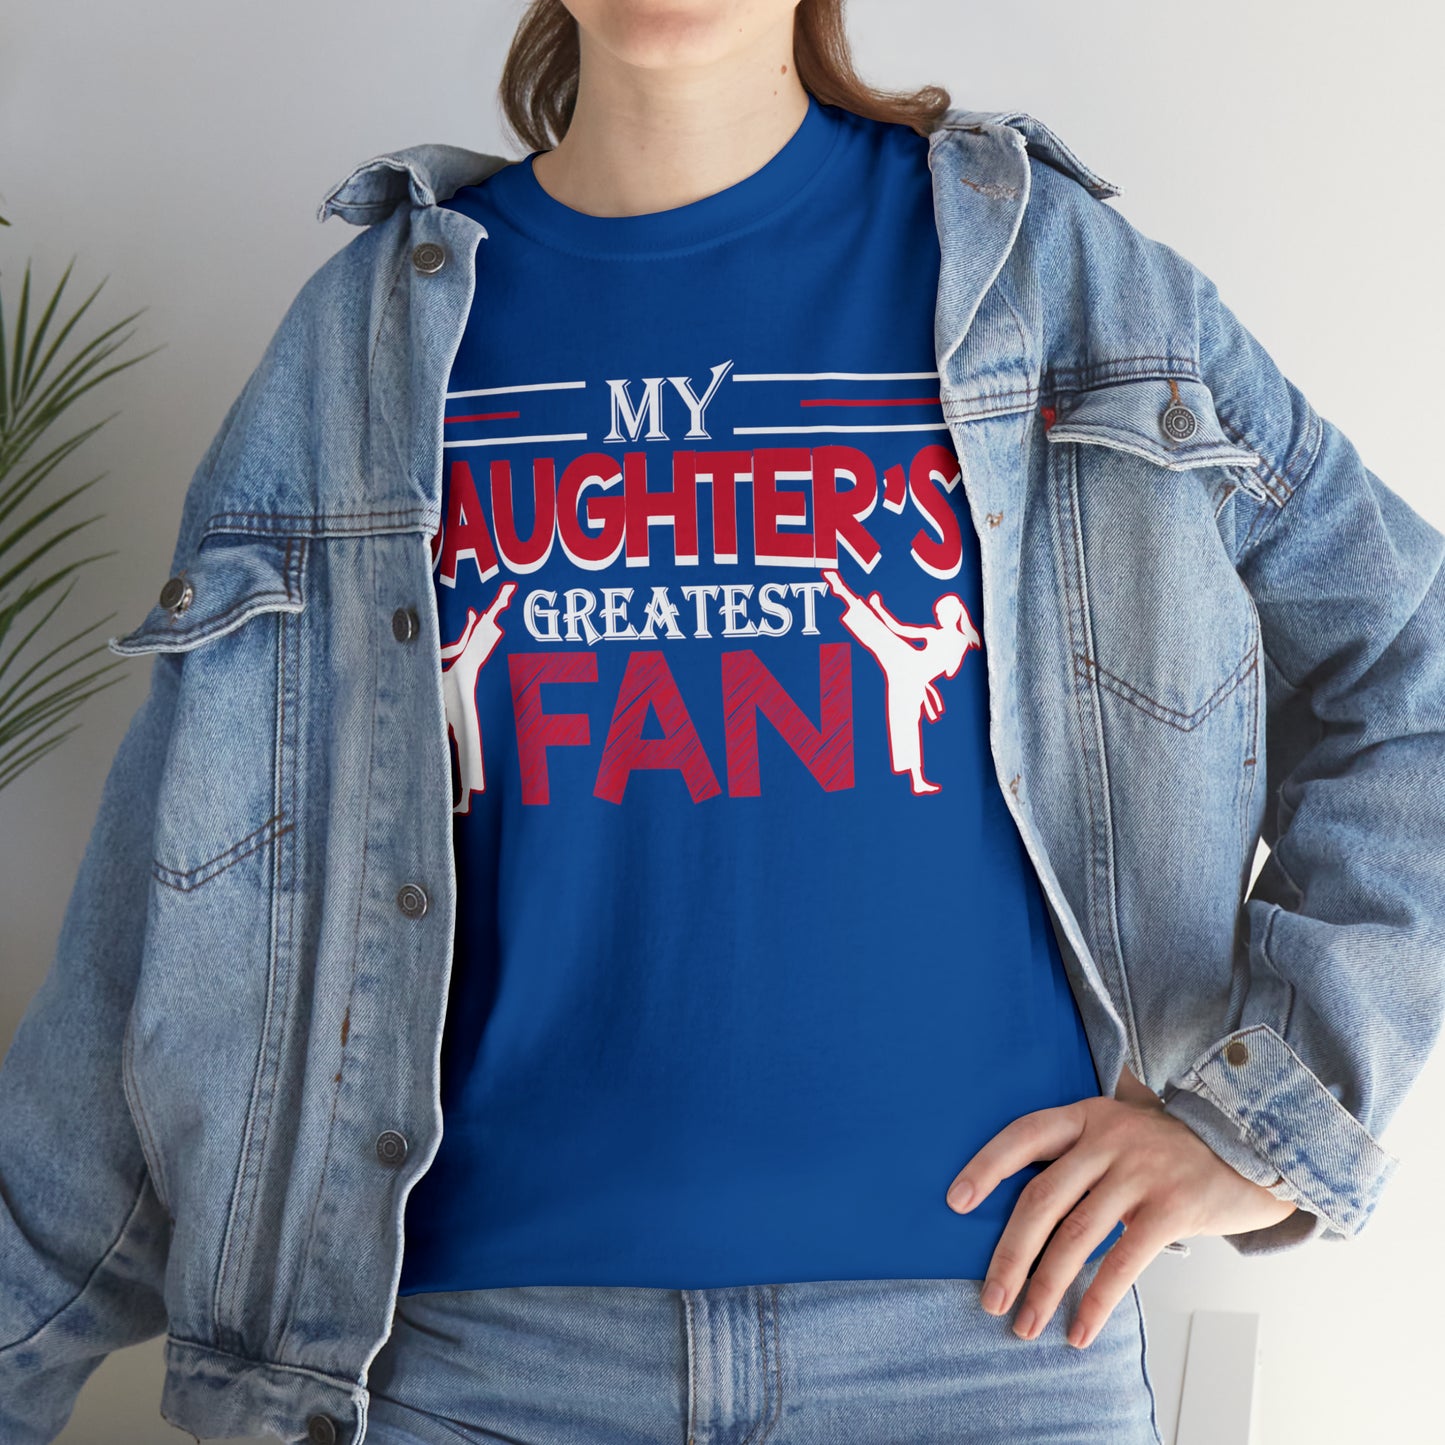 My Daughter's Greatest Fan! Shirt For Mom or Dad Heavy Cotton Tee